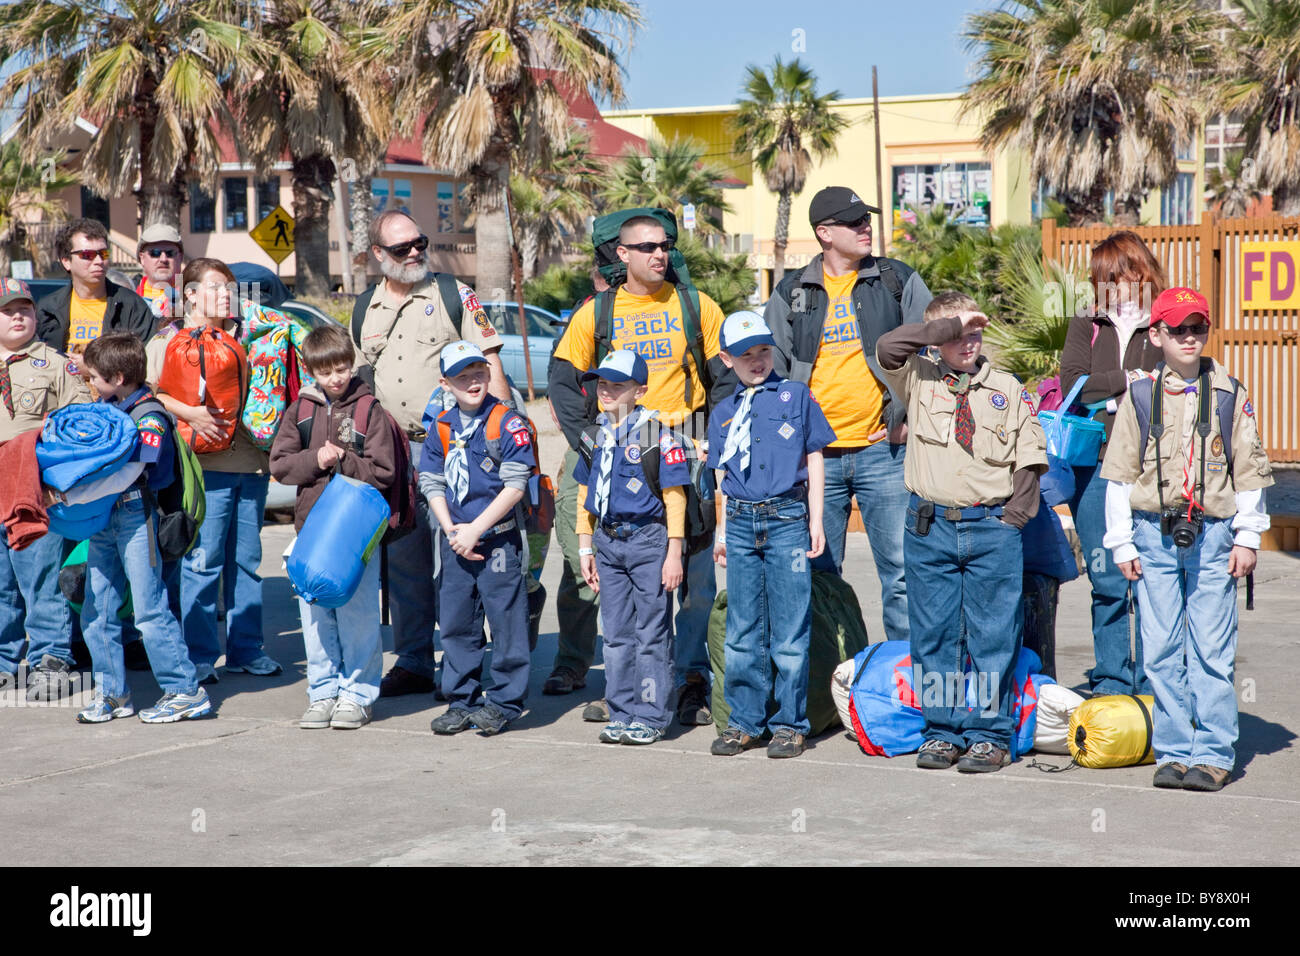 Boy & Cub Scouts with leaders, waiting to board USS Lexington, Texas Stock Photo